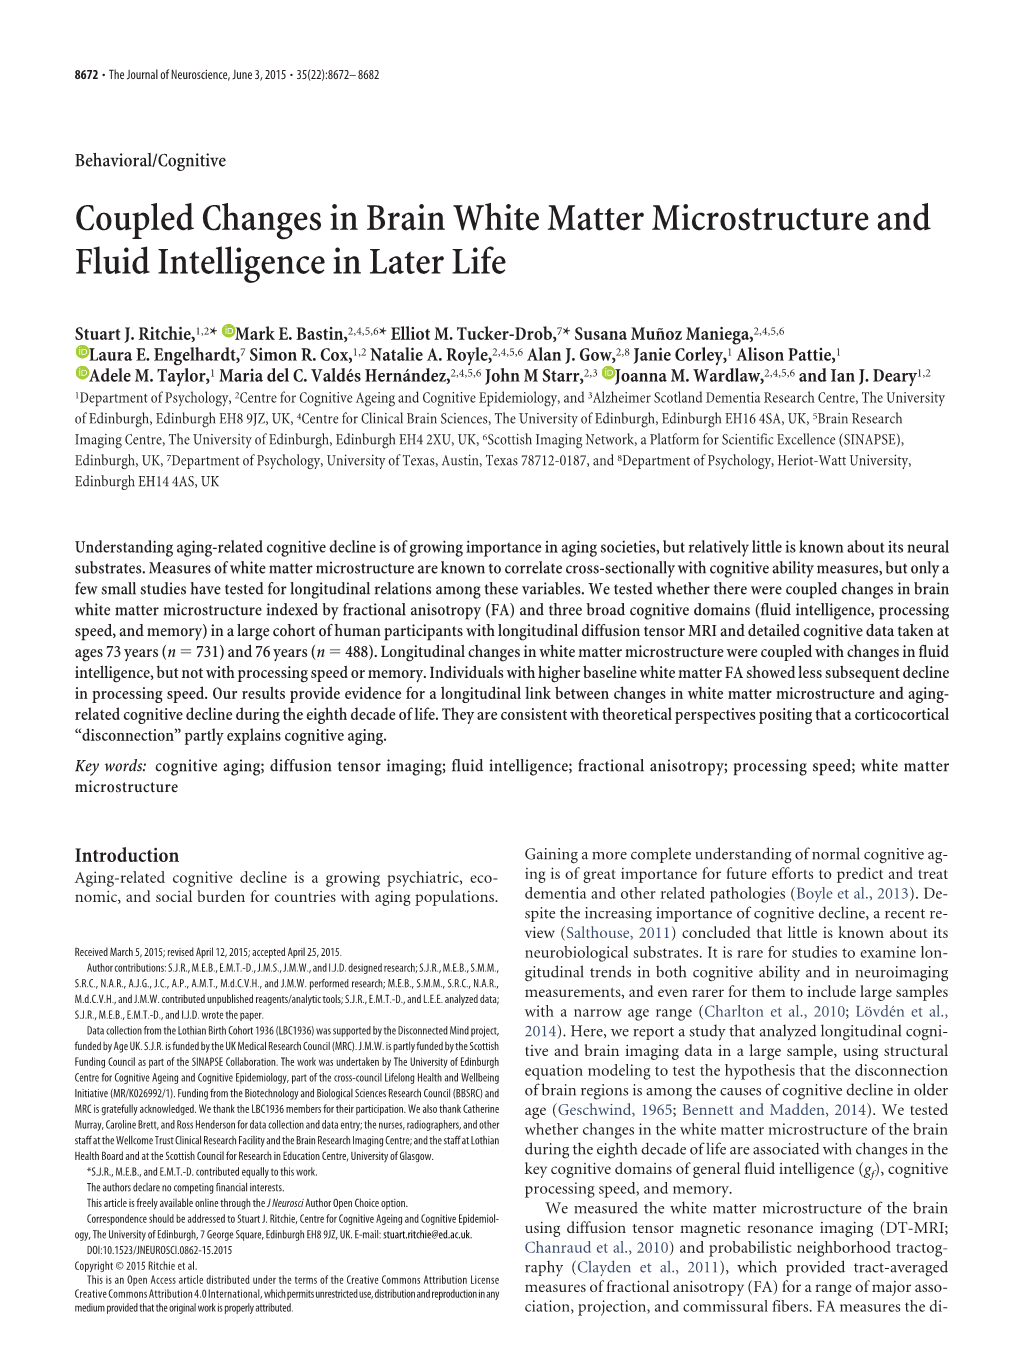 Coupled Changes in Brain White Matter Microstructure and Fluid Intelligence in Later Life